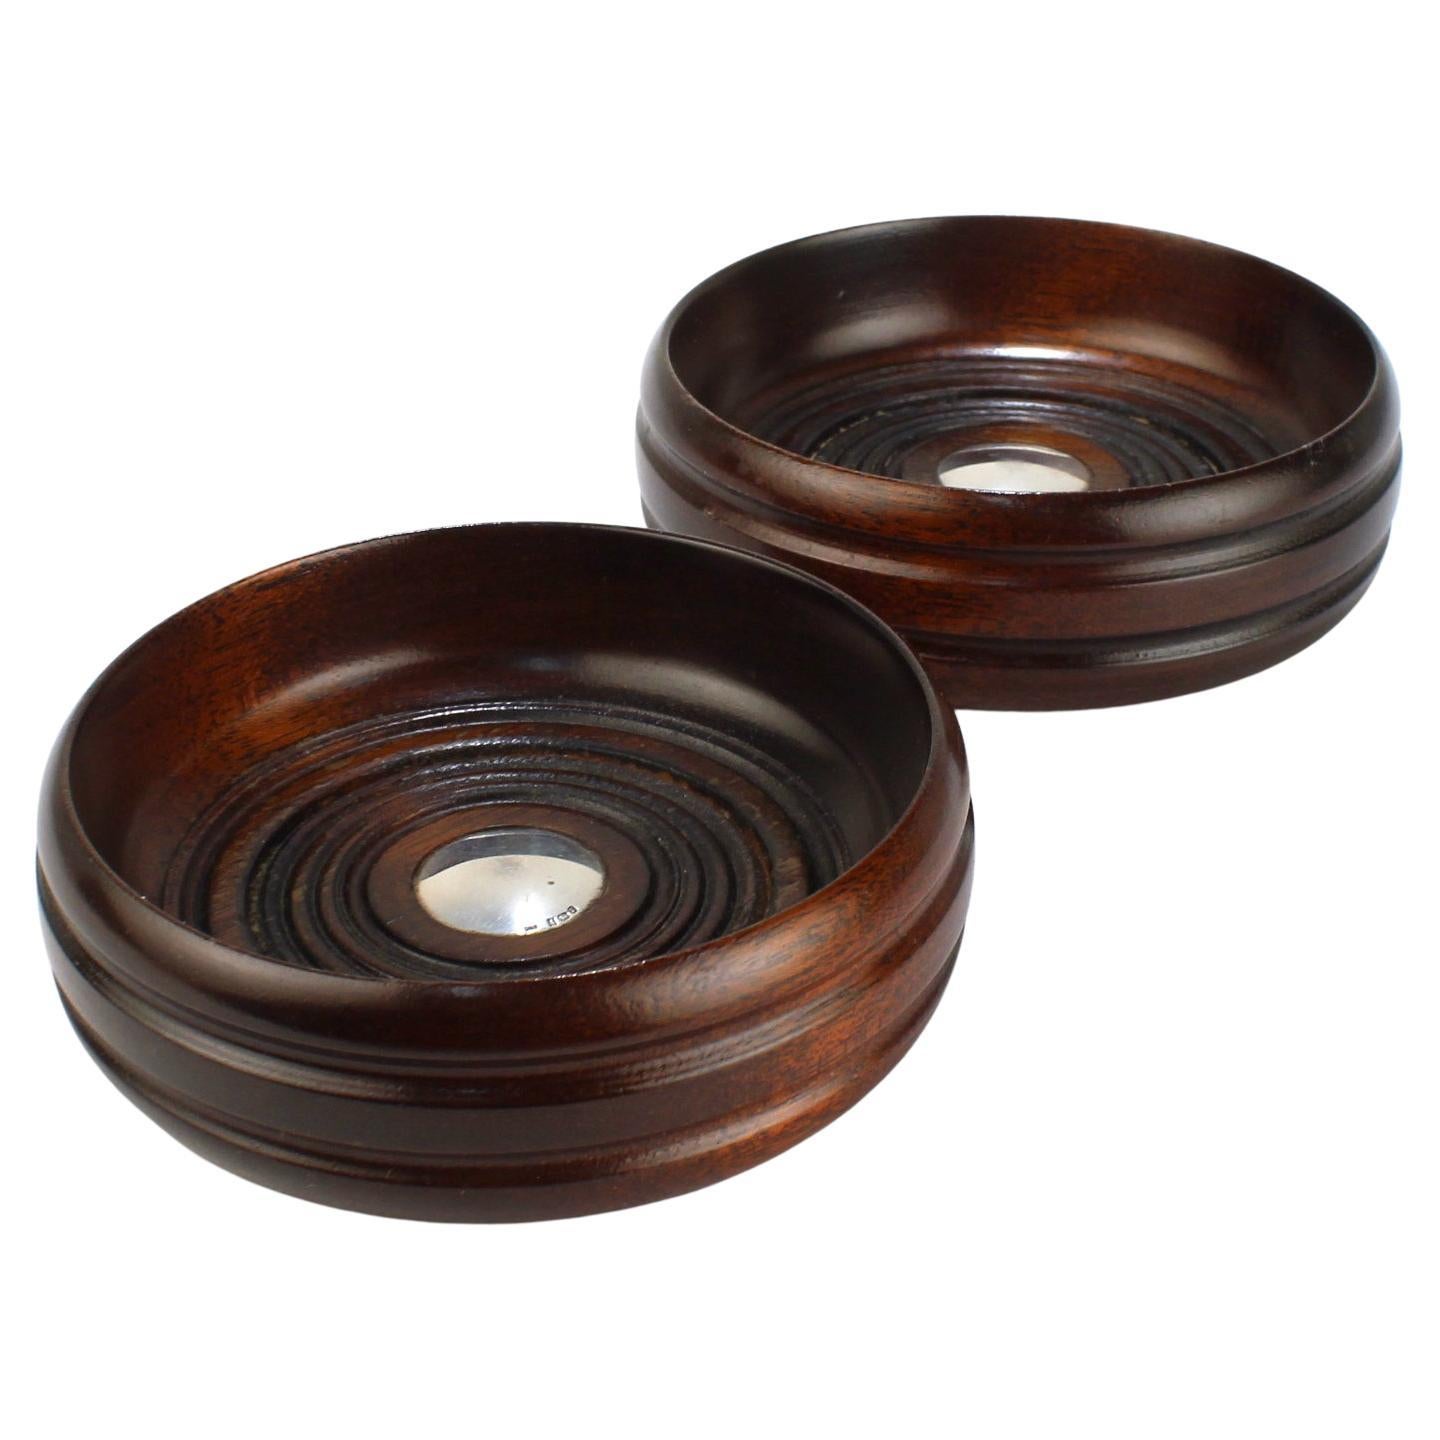 Pair of Deakin & Francis Turned Mahogany and Sterling Silver Wine Coasters